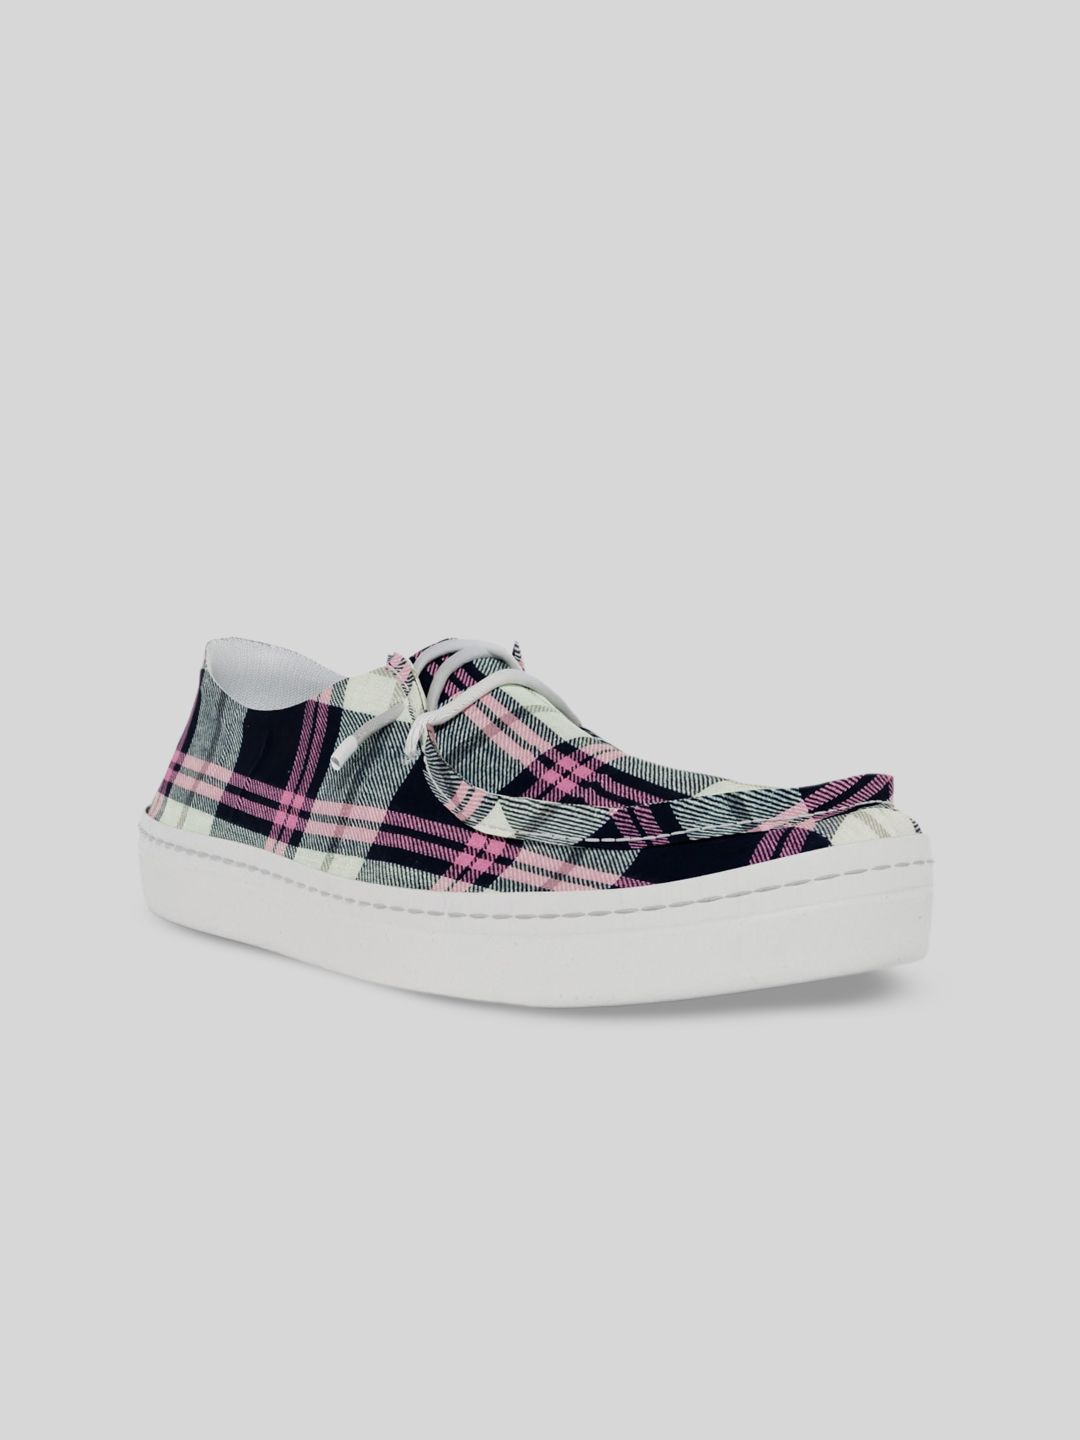 LOKAIT The Sneakers Company Women Printed Slip-On Sneakers Price in India